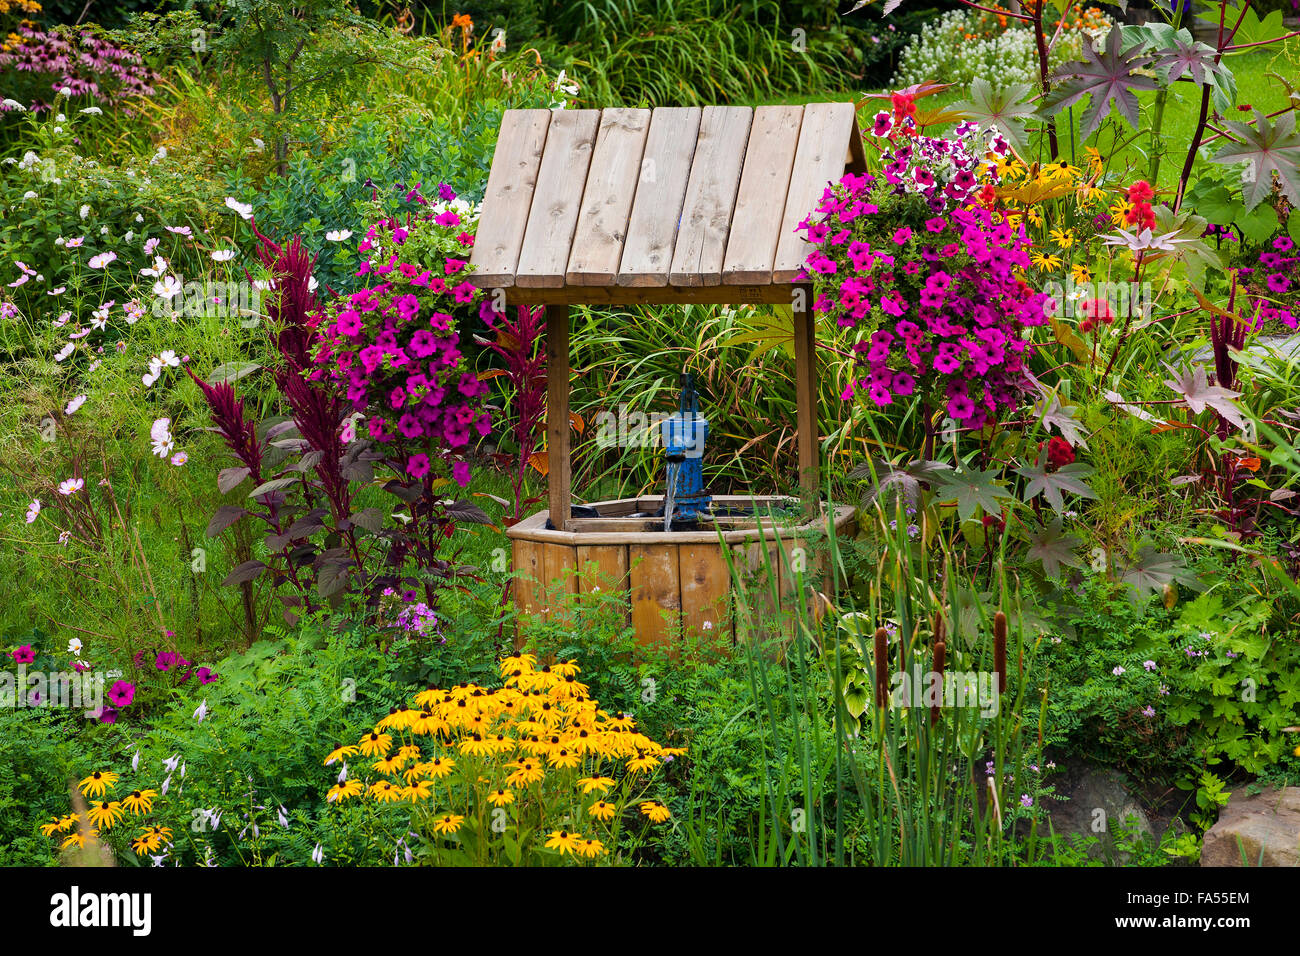 Overgrown garden with flowers and wishing well, Eastern Townships, Granby, Quebec, Canada Stock Photo